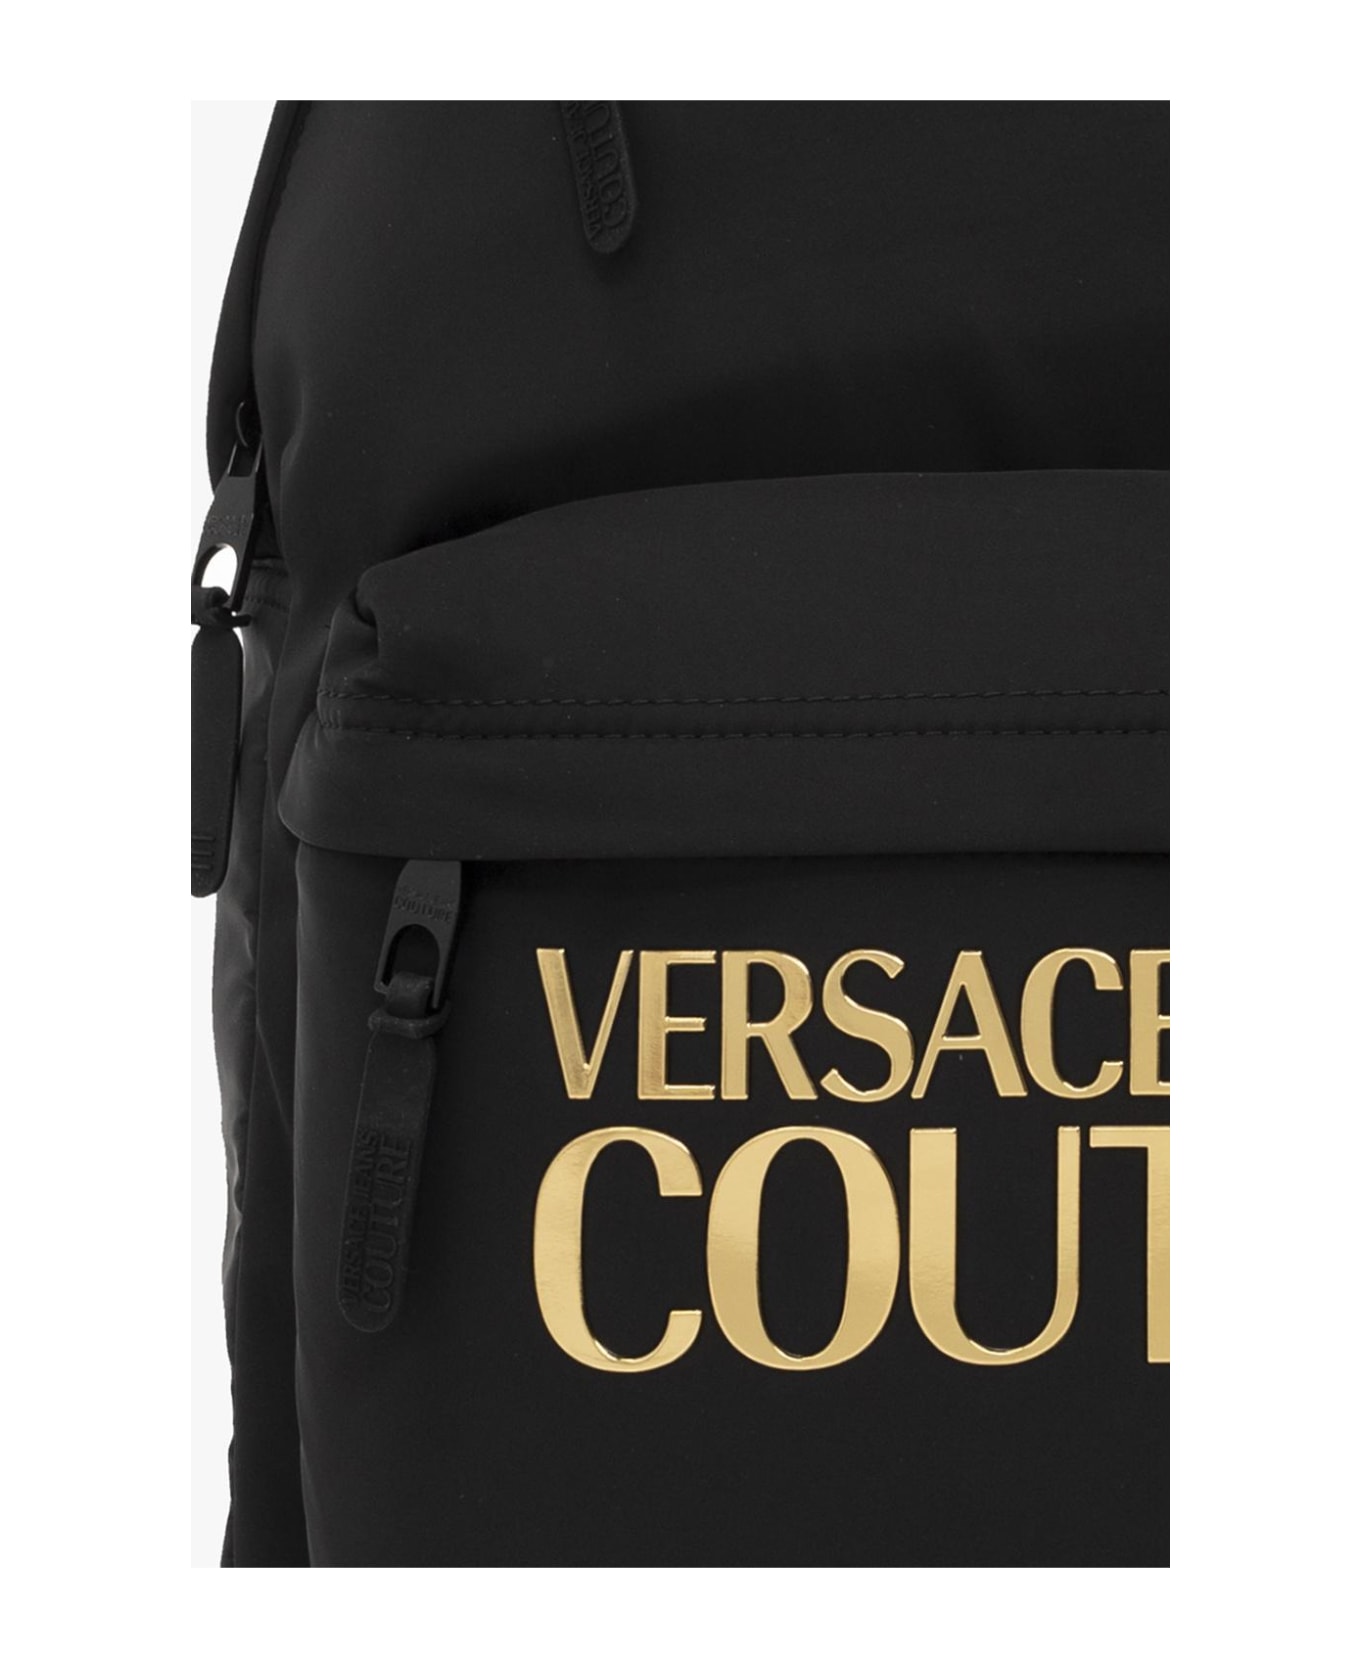 Versace Jeans Couture Bag - BLACK/GOLD バックパック